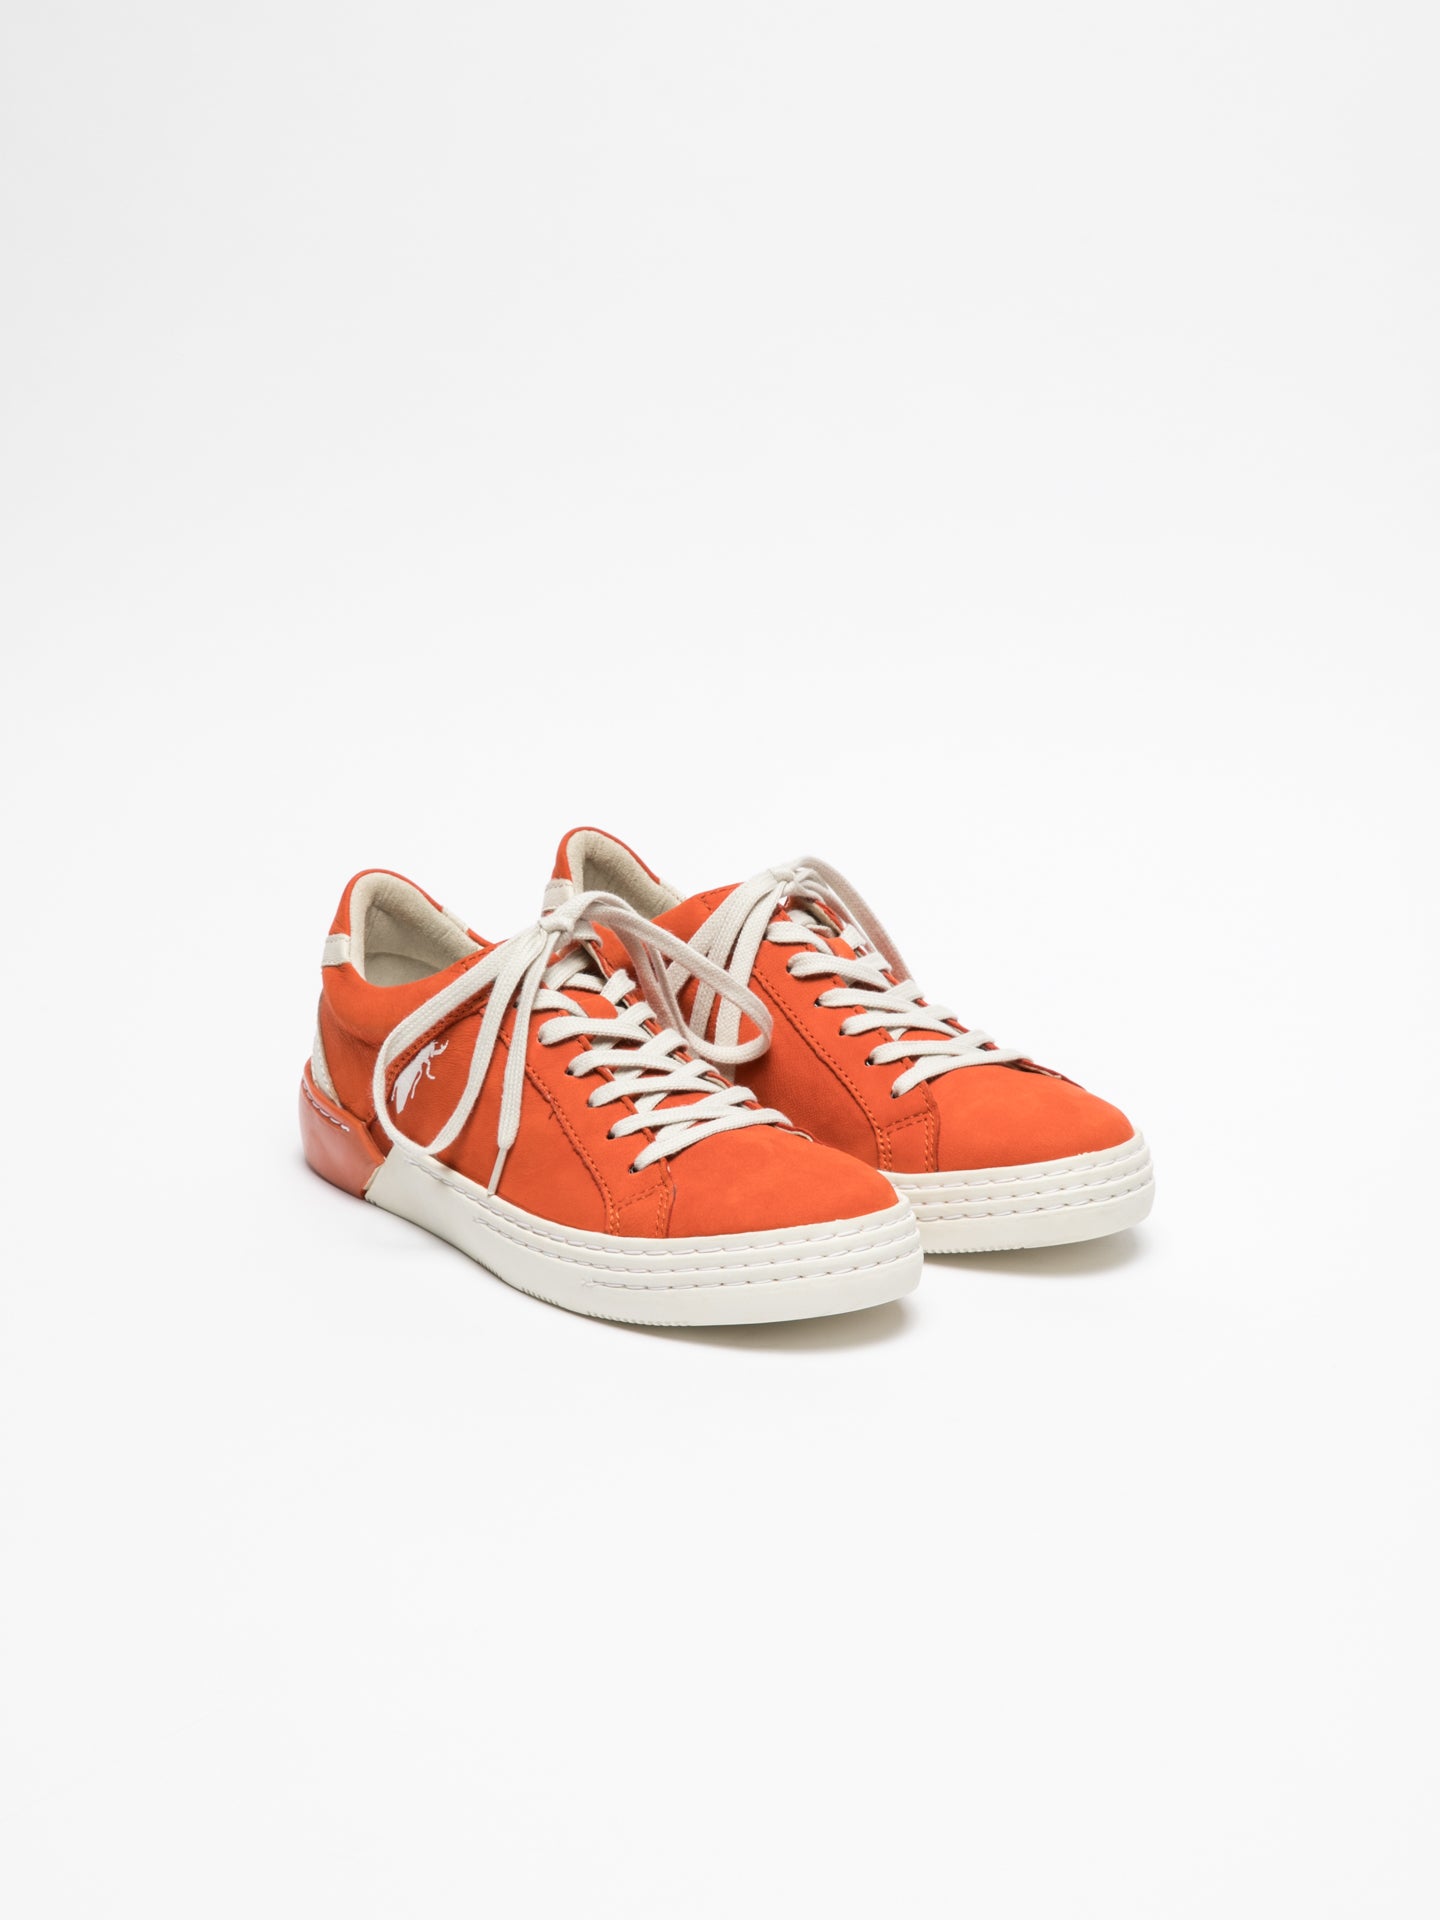 Fly London Orange Lace-up Trainers